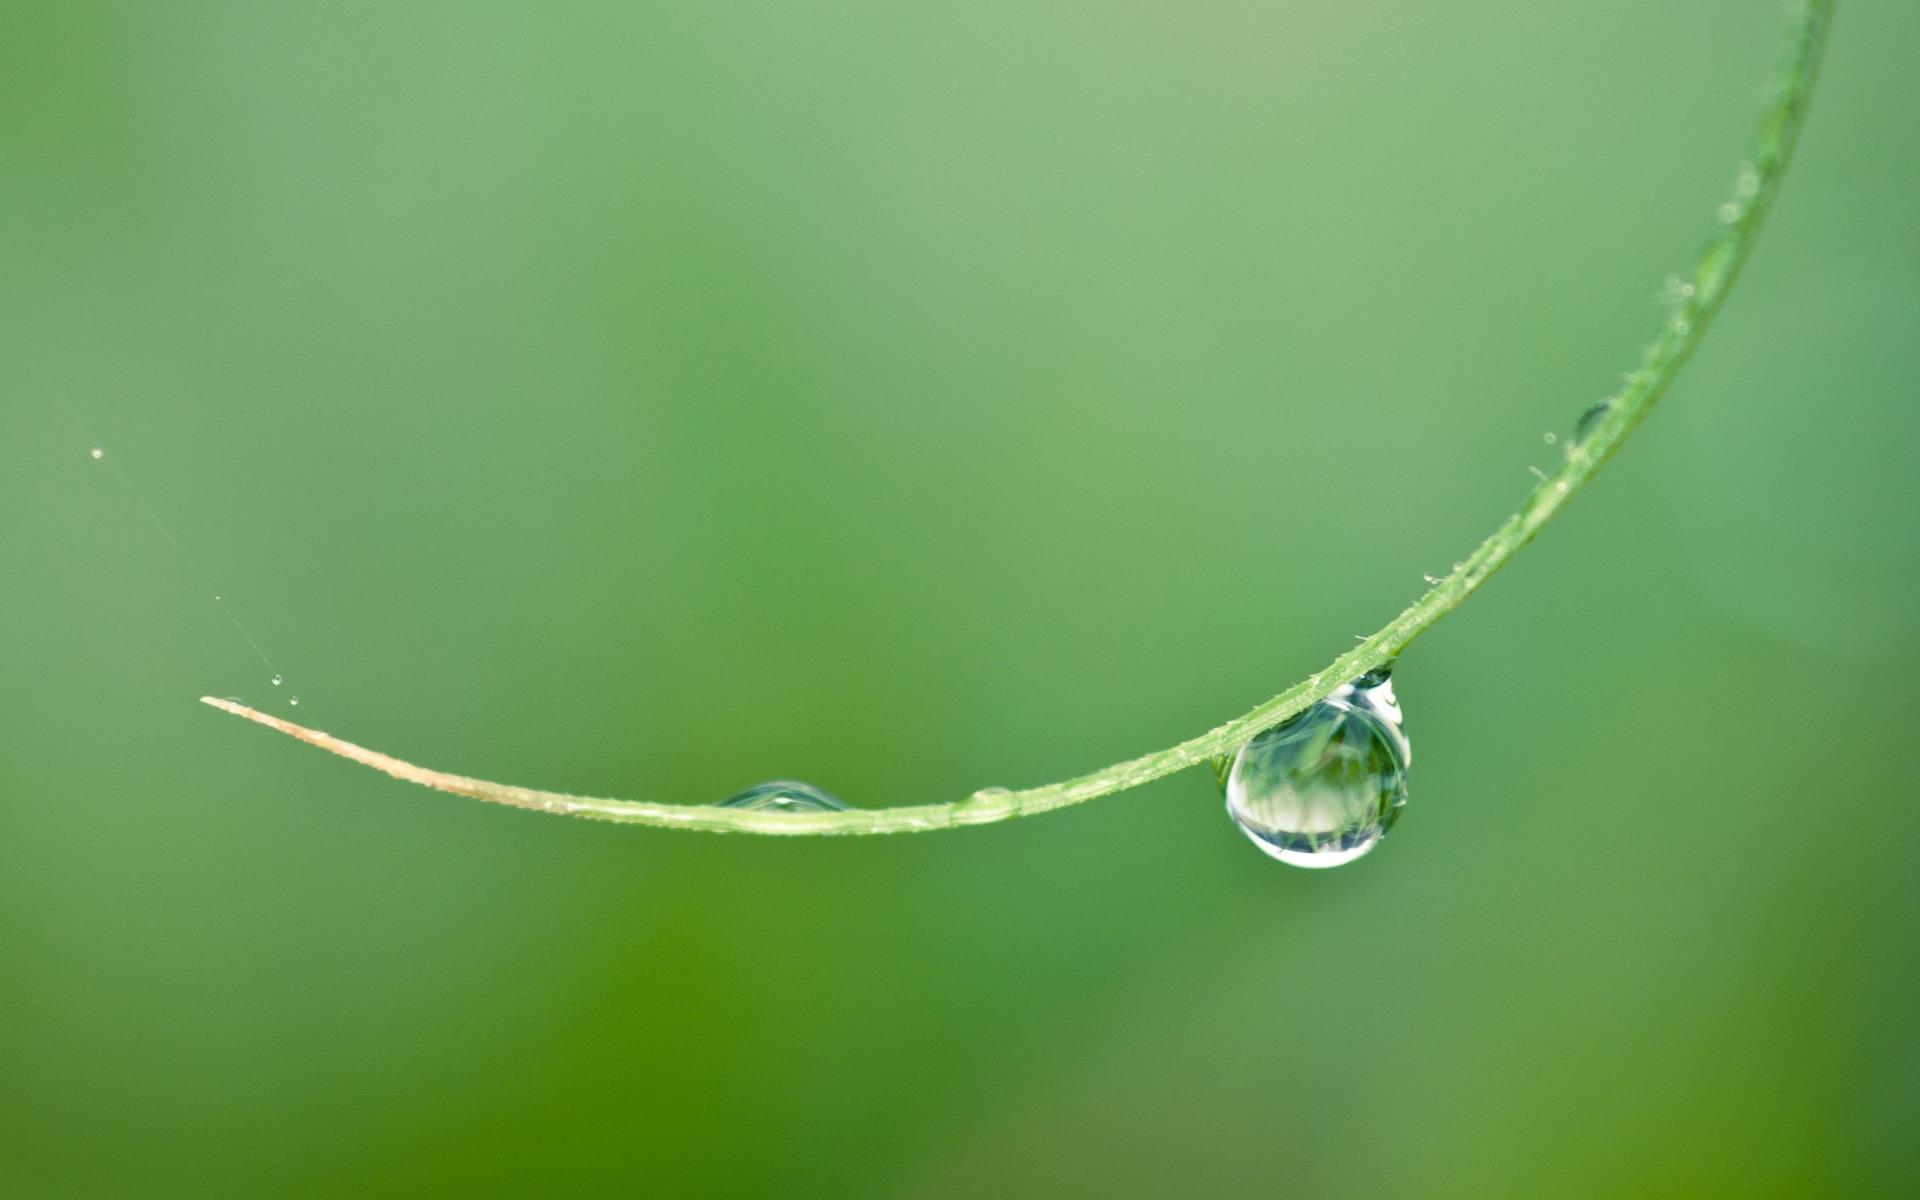 High definition wallpaper image of water droplets on green leaves